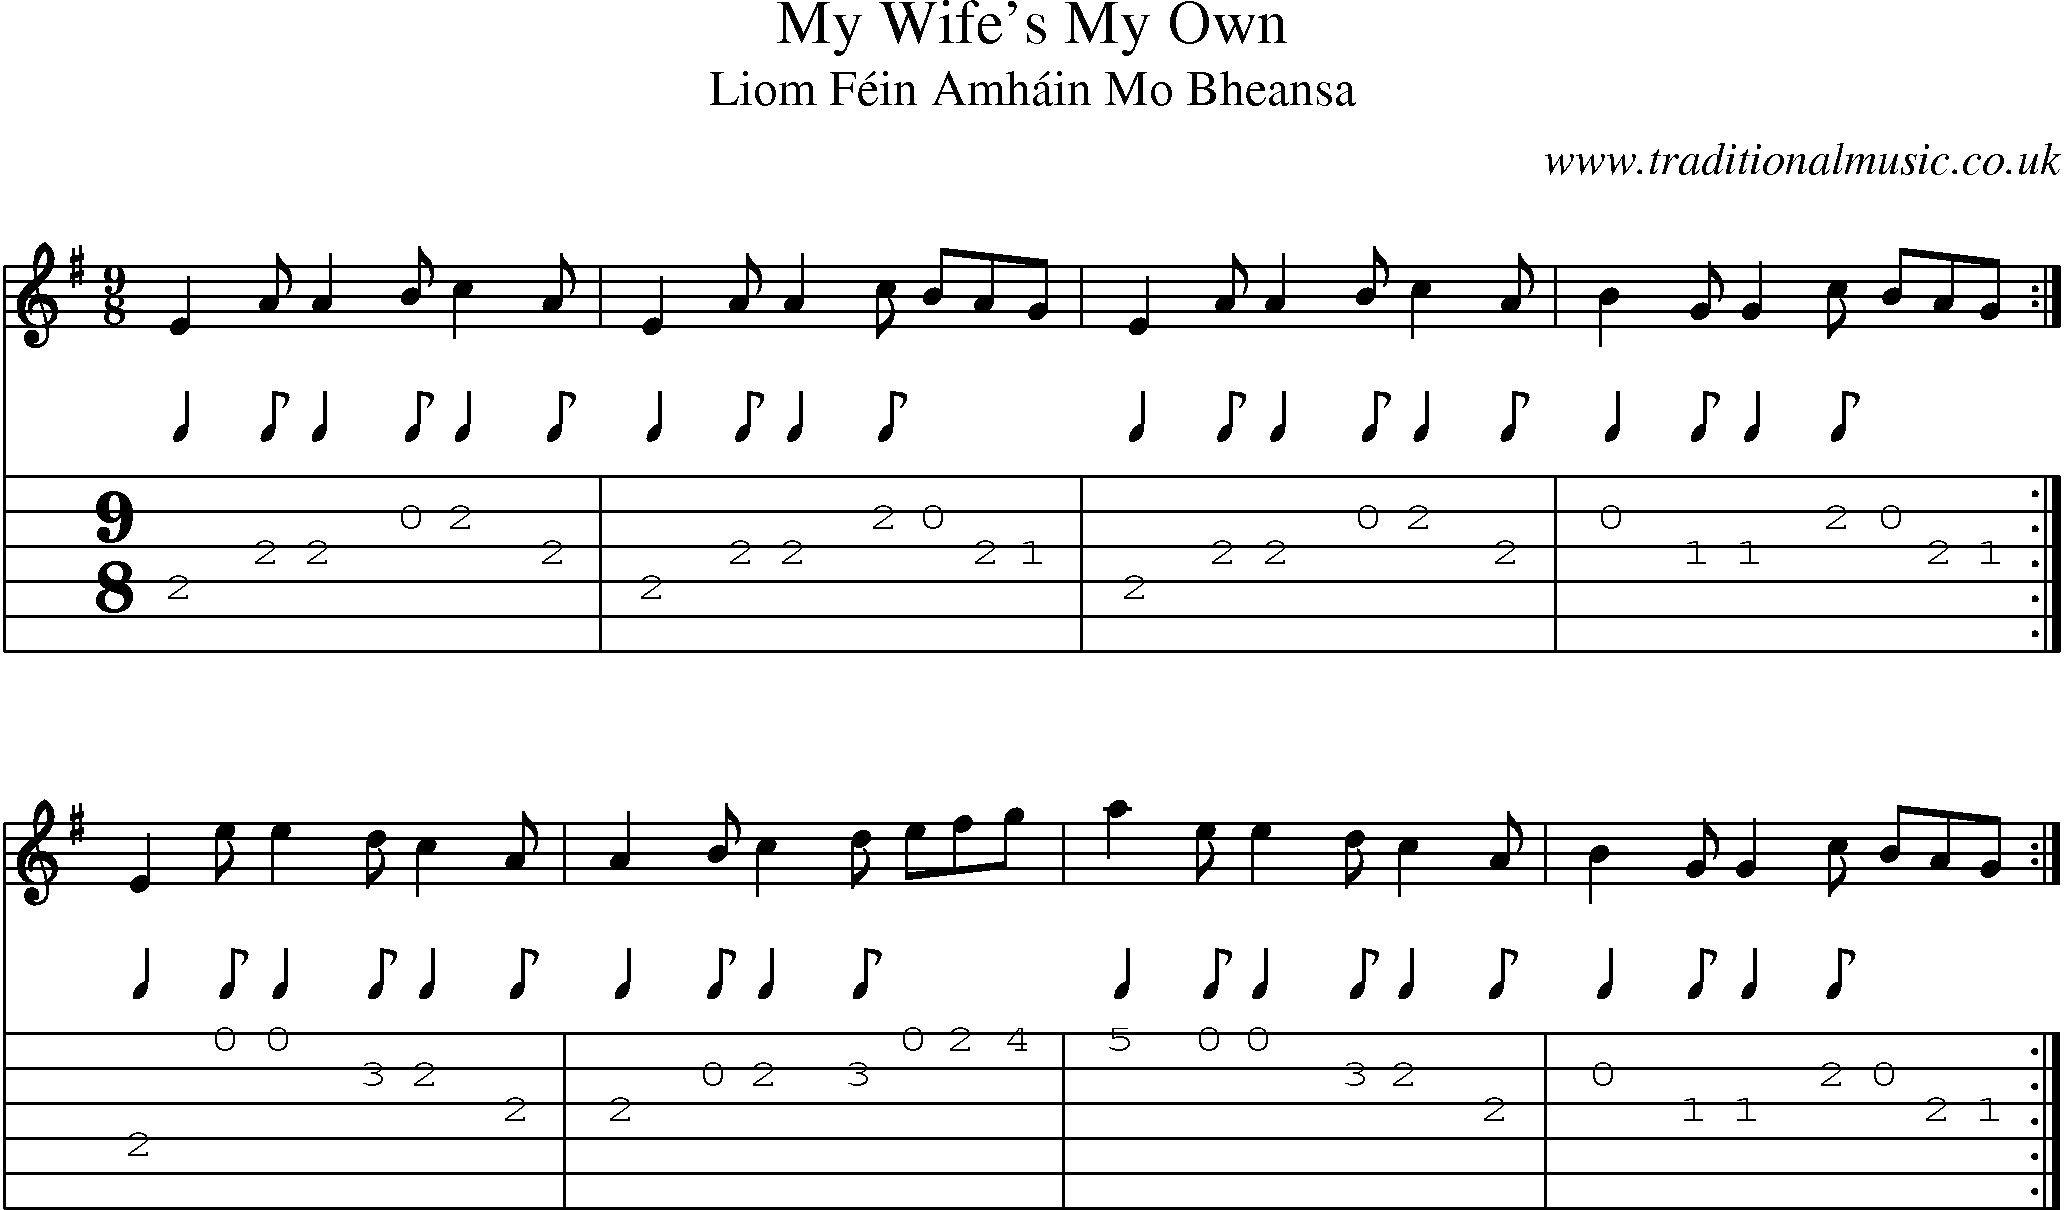 Music Score and Guitar Tabs for My Wifes My Own